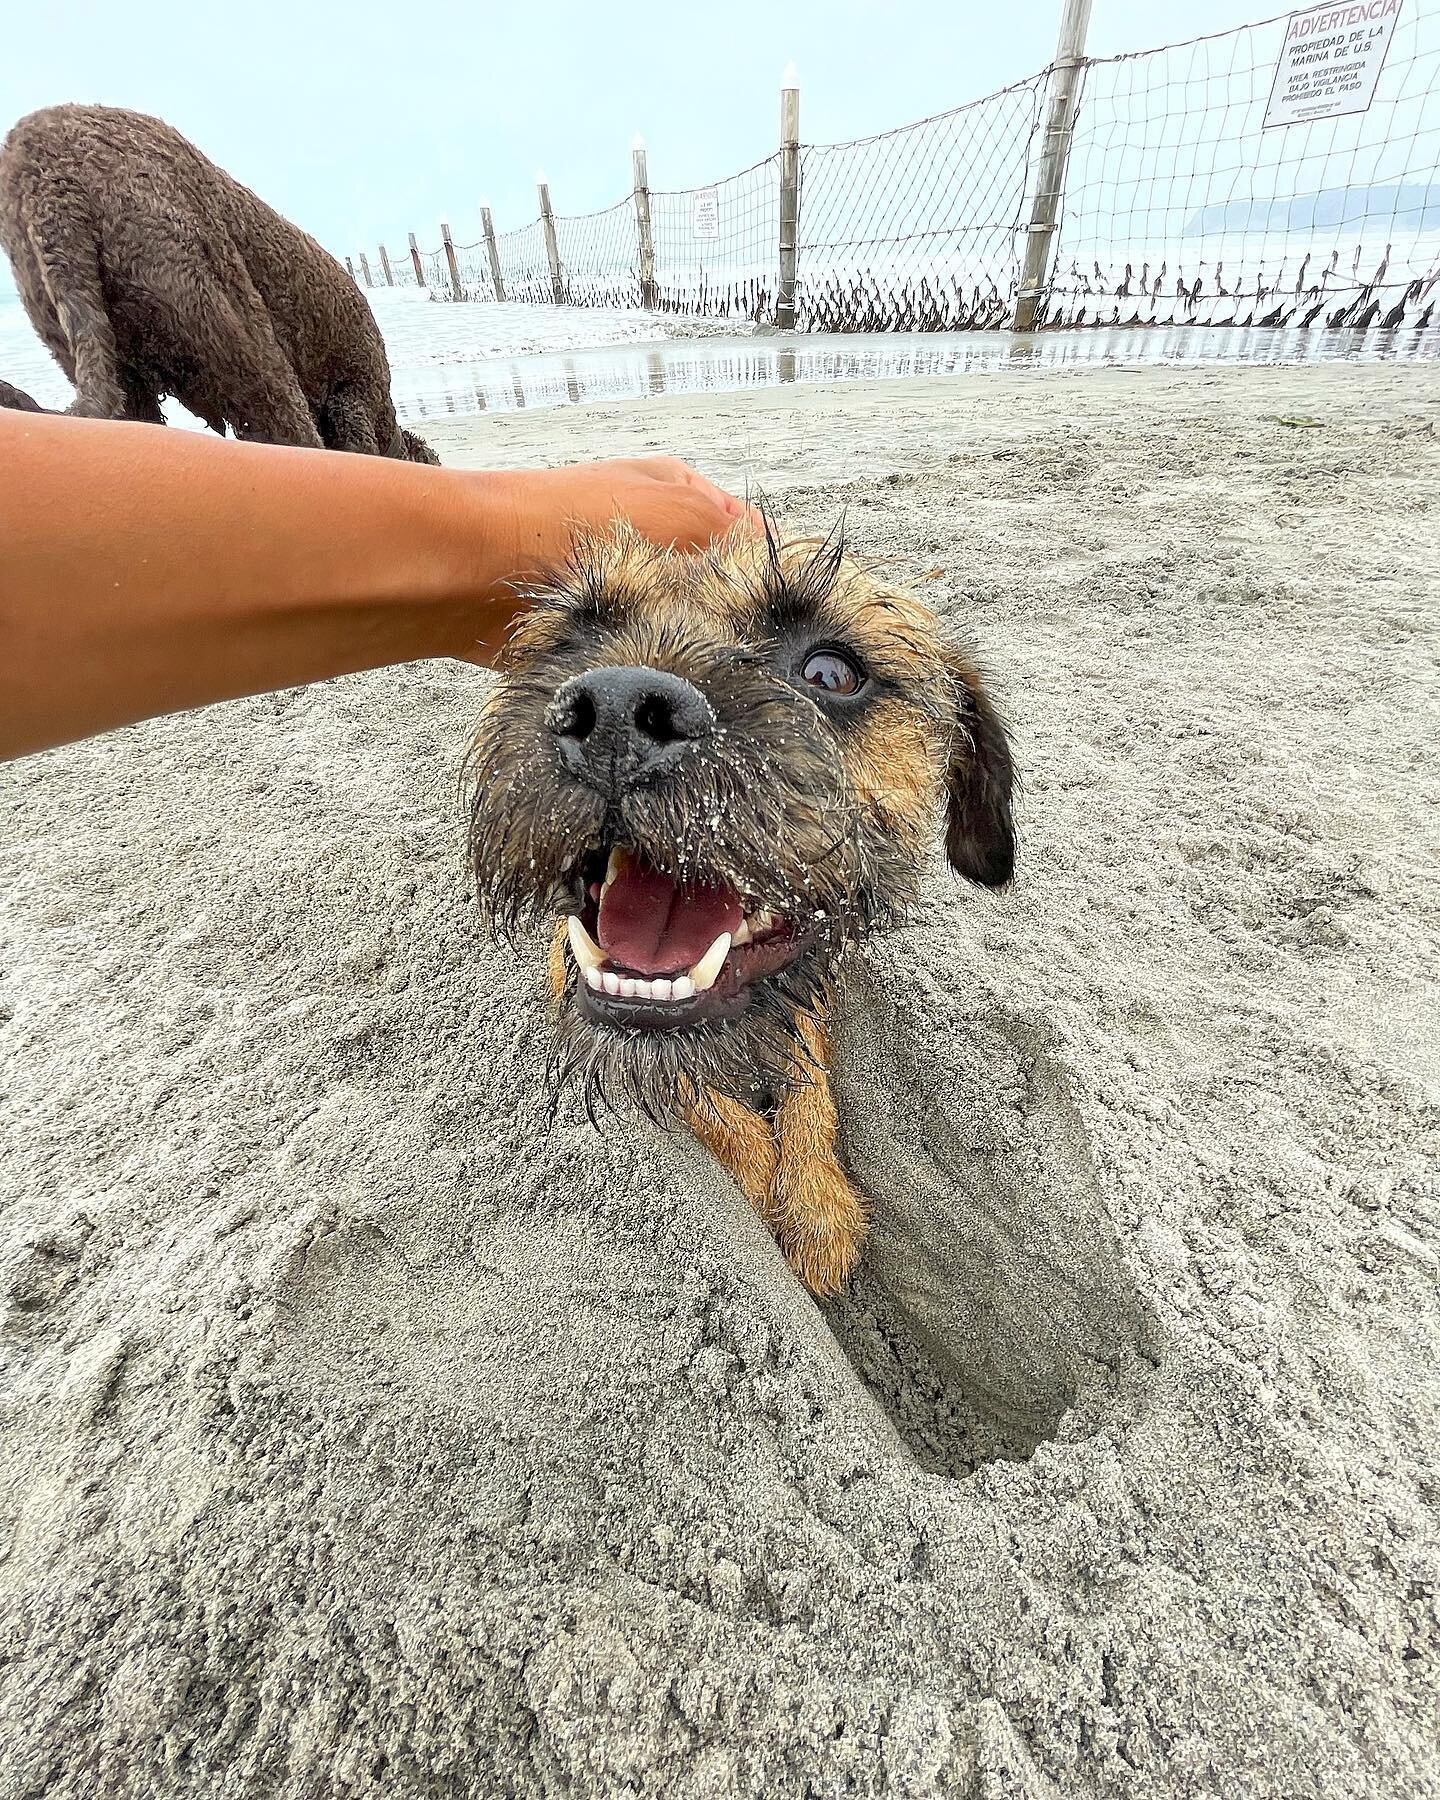 Just let the dogs RUN! 💨 

You ever heard that term &ldquo;living your best life&rdquo;? Well, this is the definition of it. Beach play dogs are living their best life by being active, healthy, and happy all in one single exercise. 

LIVING. YOUR. B